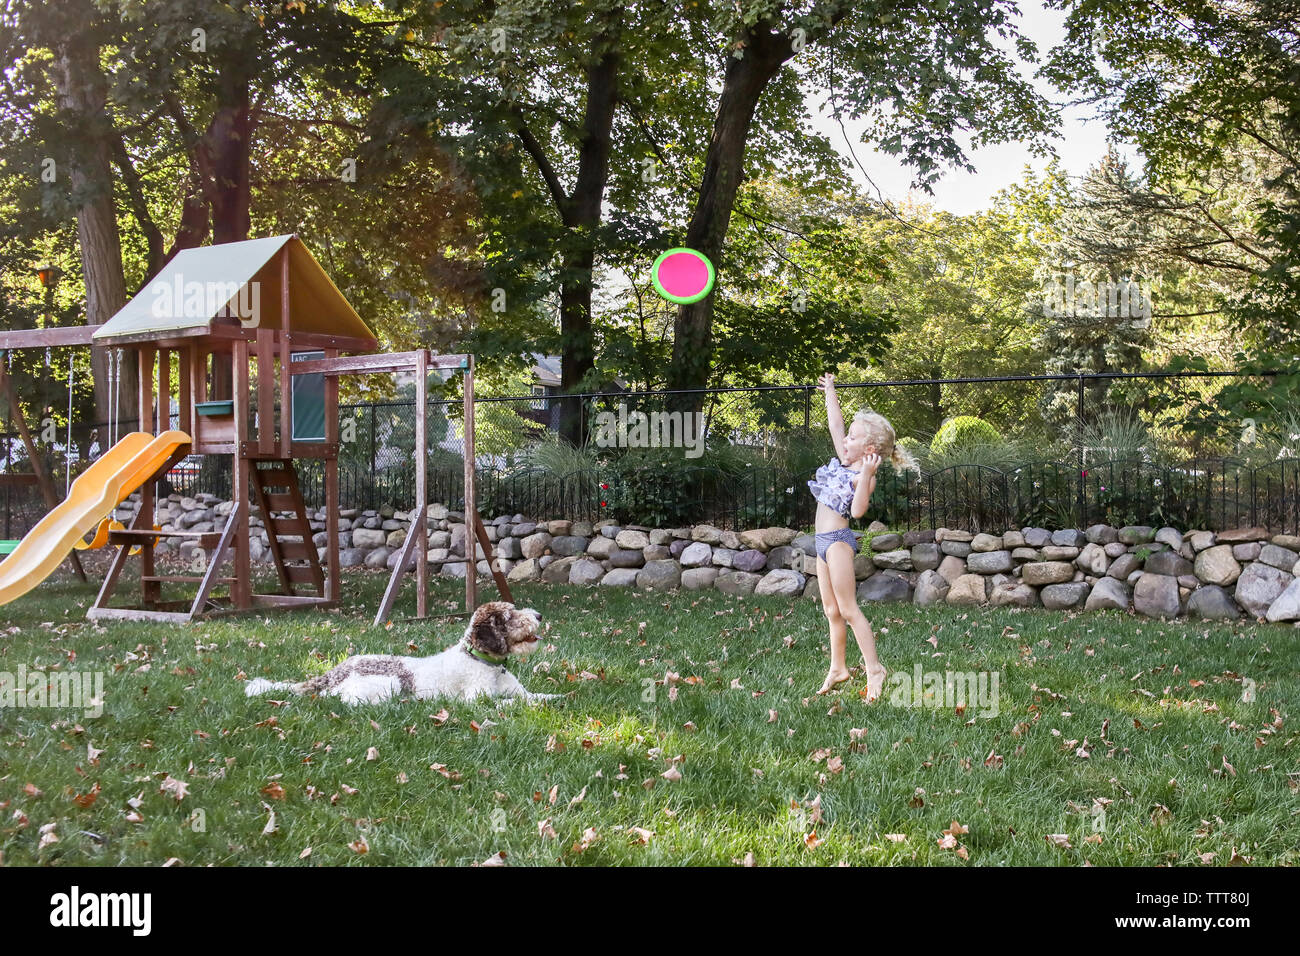 Playful girl throwing frisbee with dog at playground Stock Photo